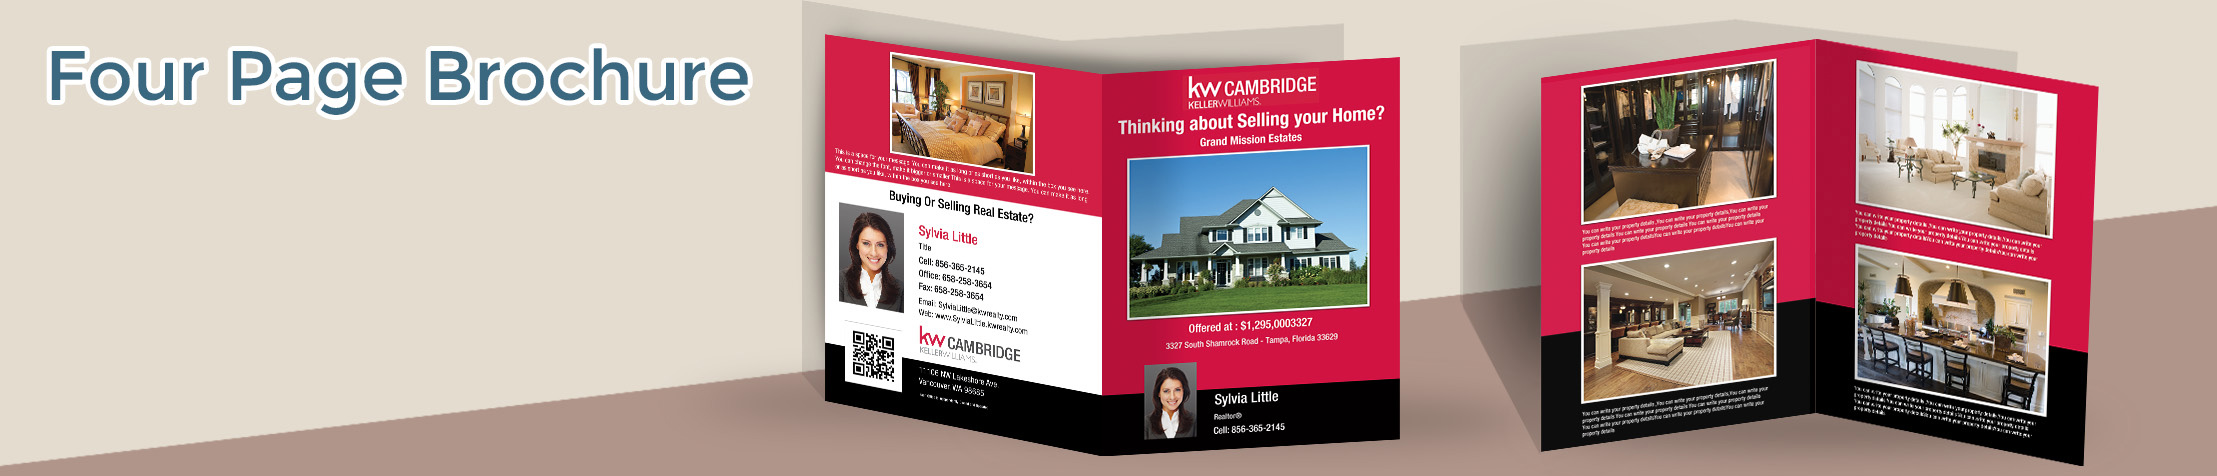 Keller Williams Real Estate Flyers and Brochures - KW approved vendor four page brochure templates for open houses and marketing | BestPrintBuy.com